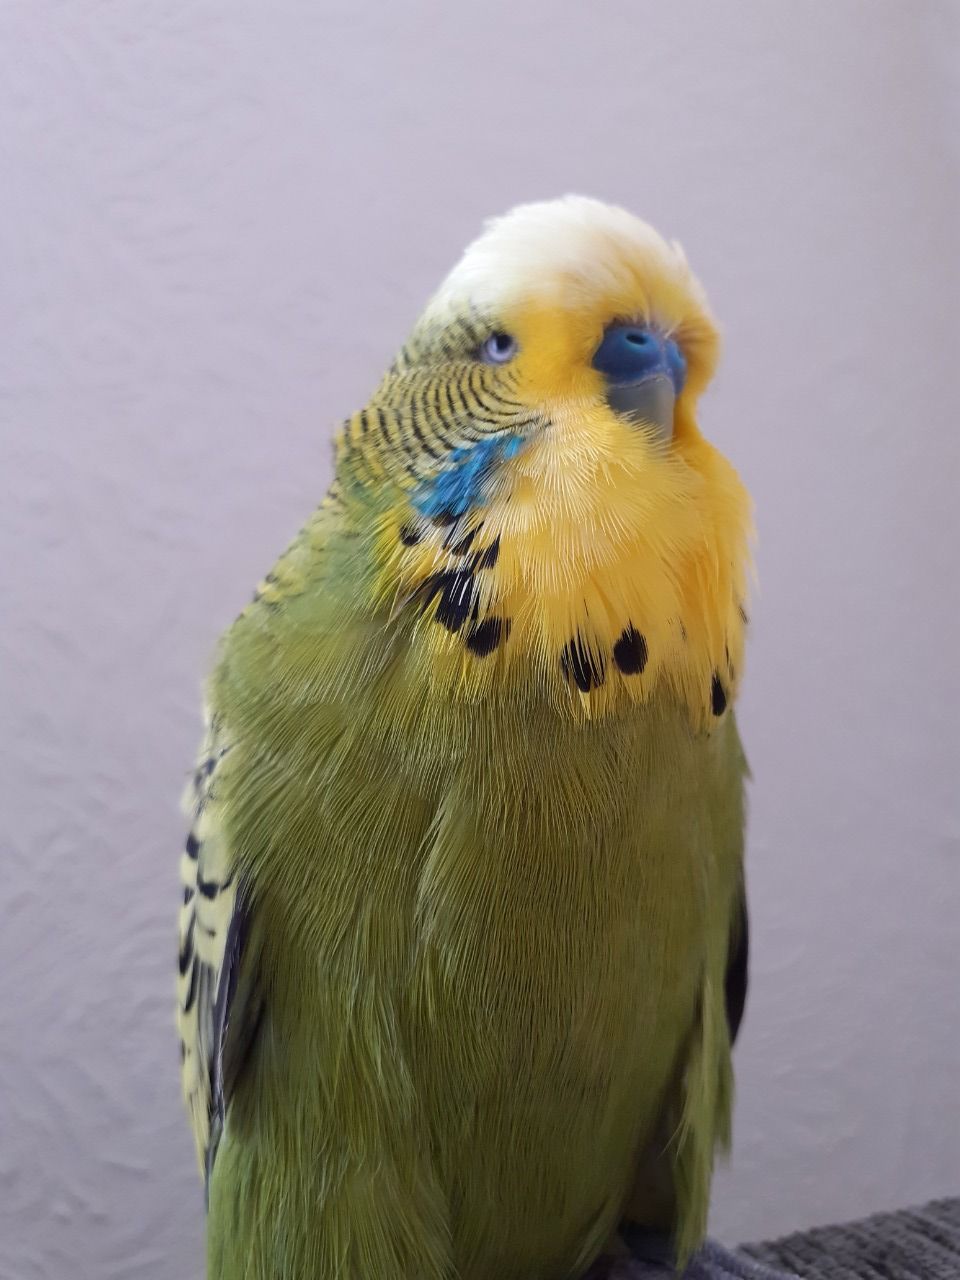 Budgie Needs Loving Home - ADOPT AND BUY YOUR PARROT